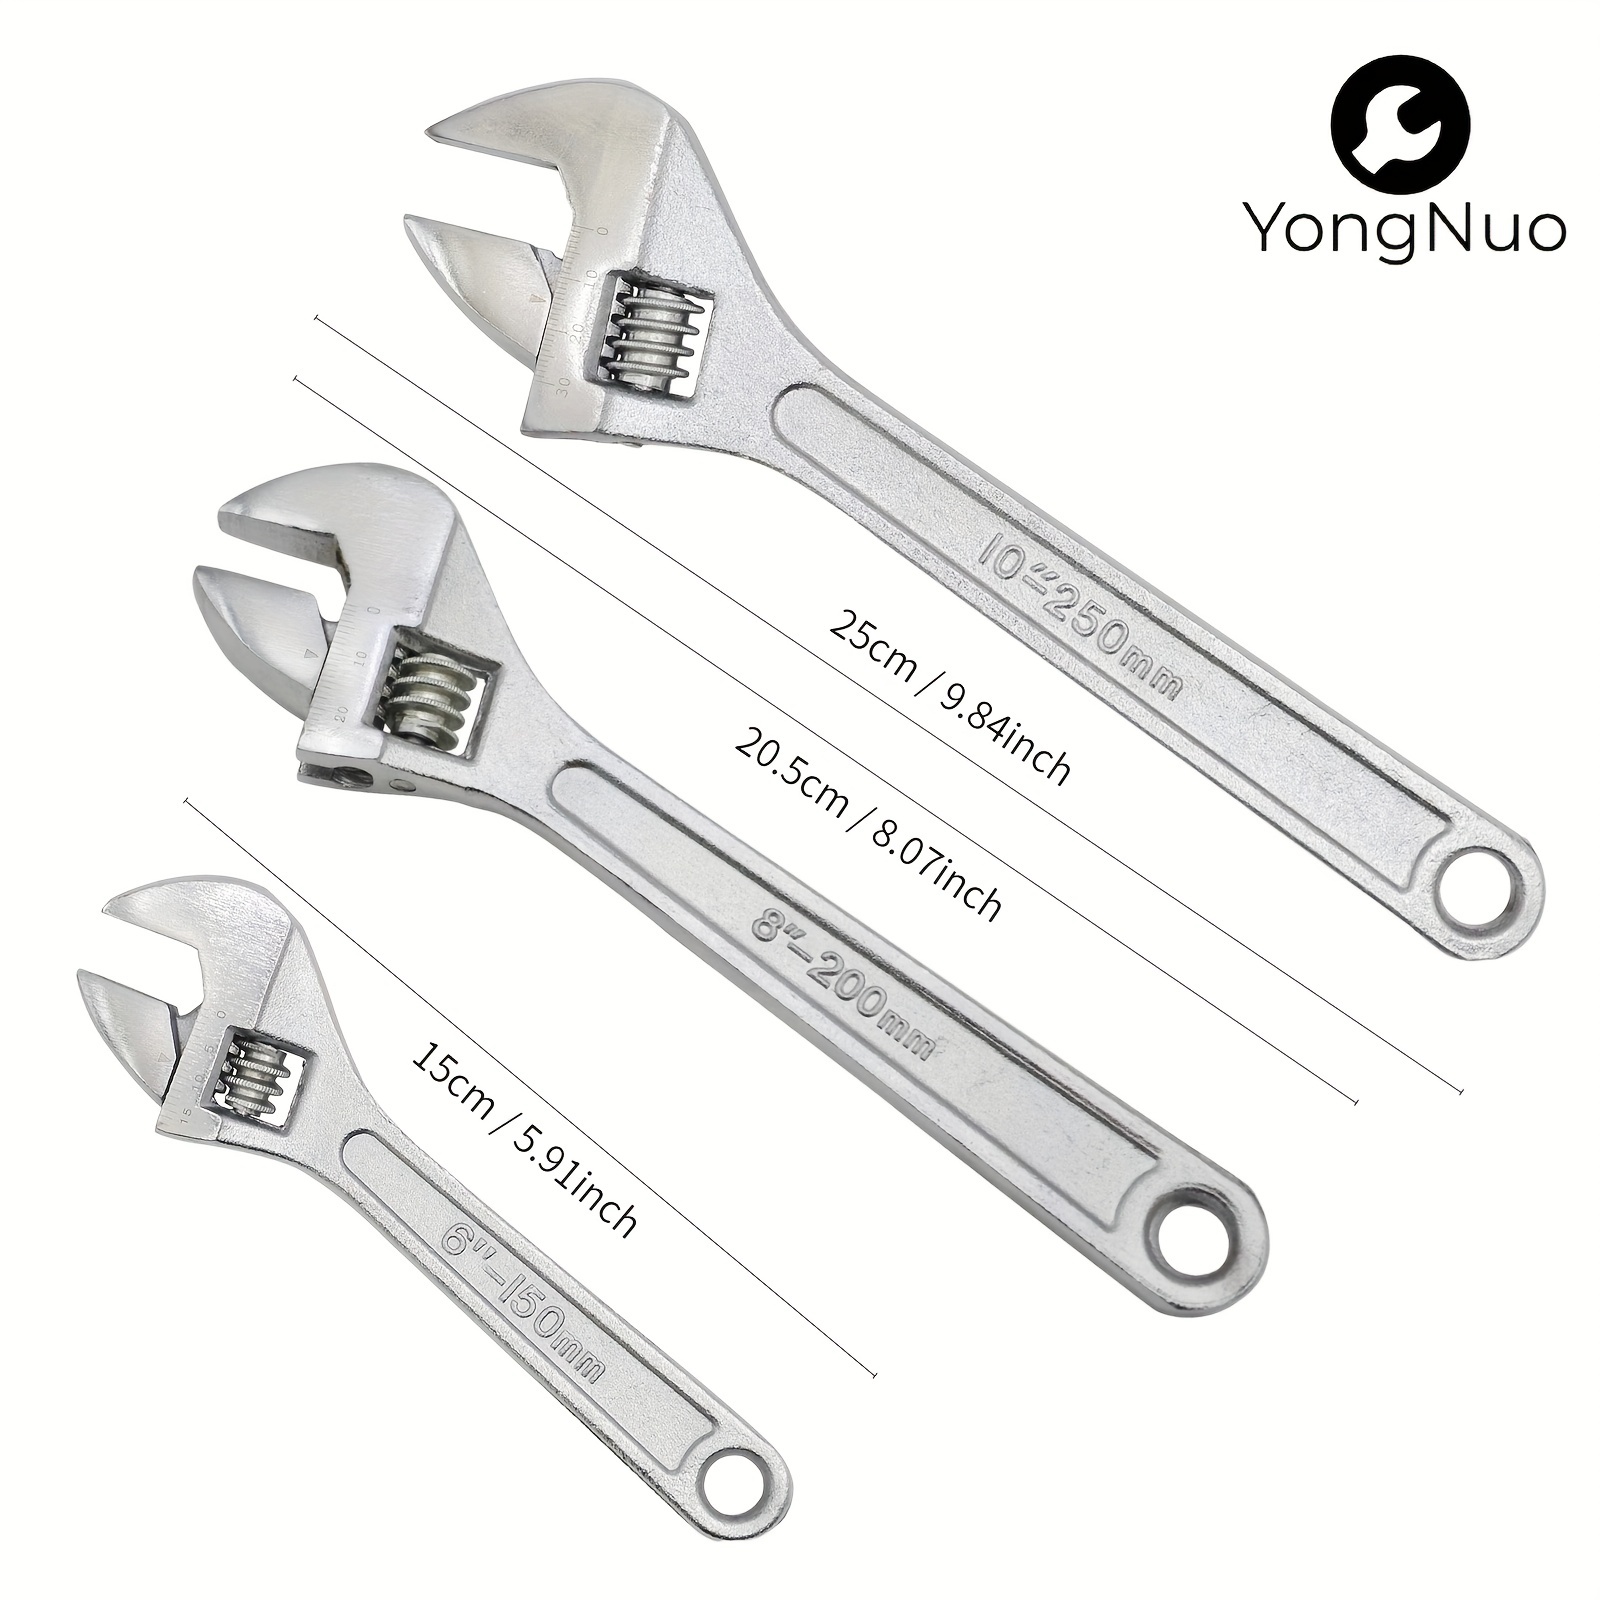 18 Automotive Wrench, Pipe Wrench